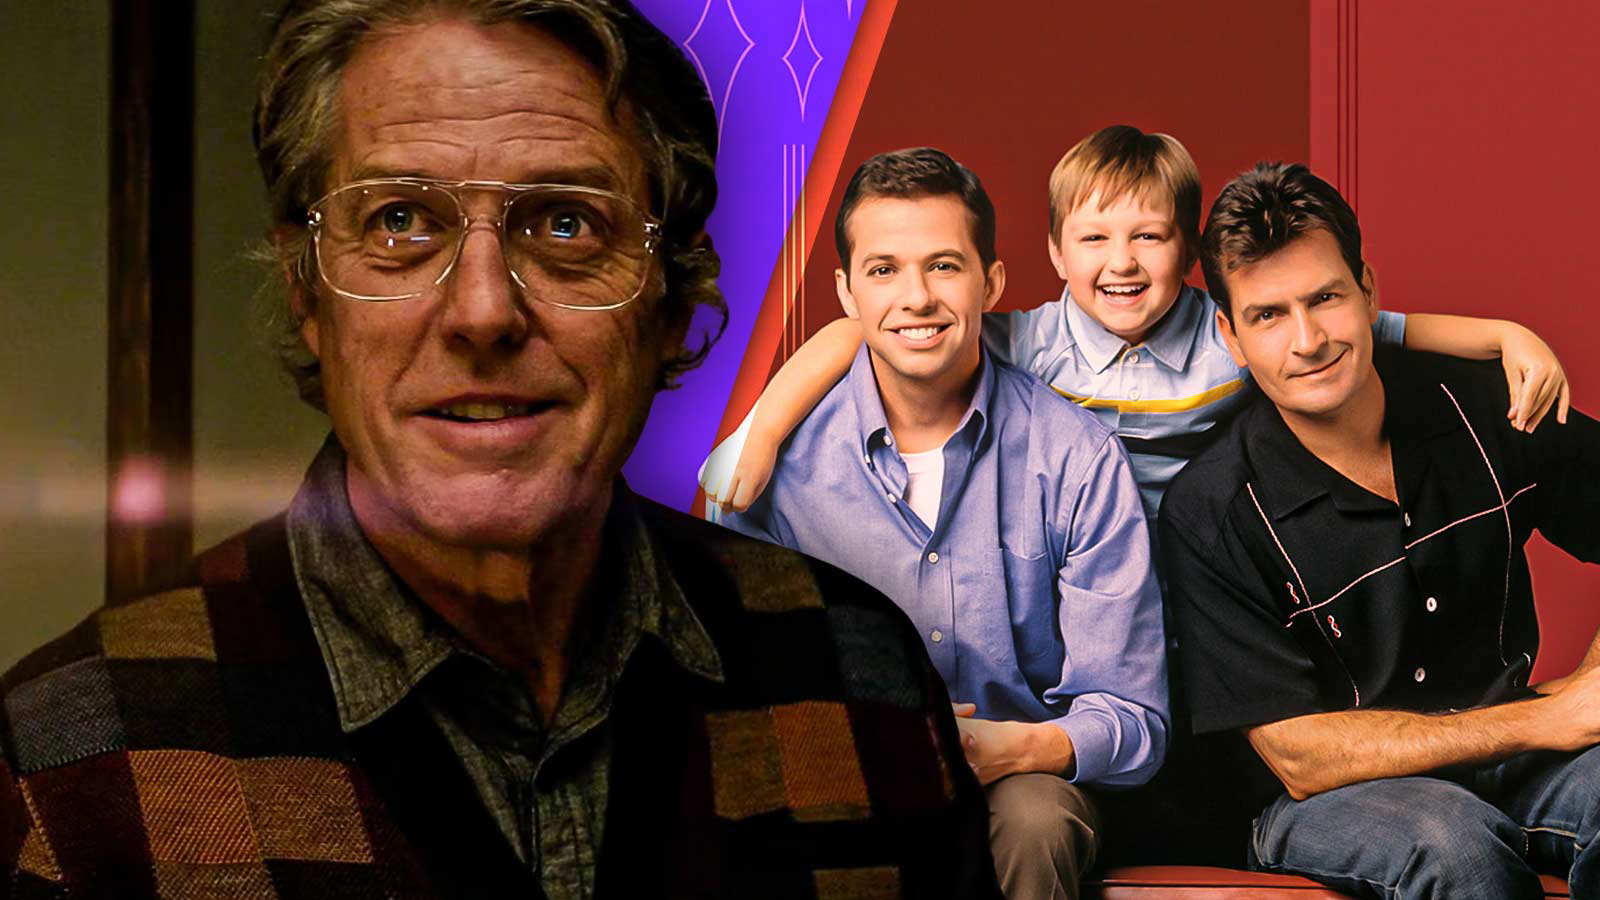 “I’m too scared to sign up without…”: Hugh Grant Turned Down a $2.5M Per Episode Role in Two and a Half Men as it Lacked One Crucial Thing